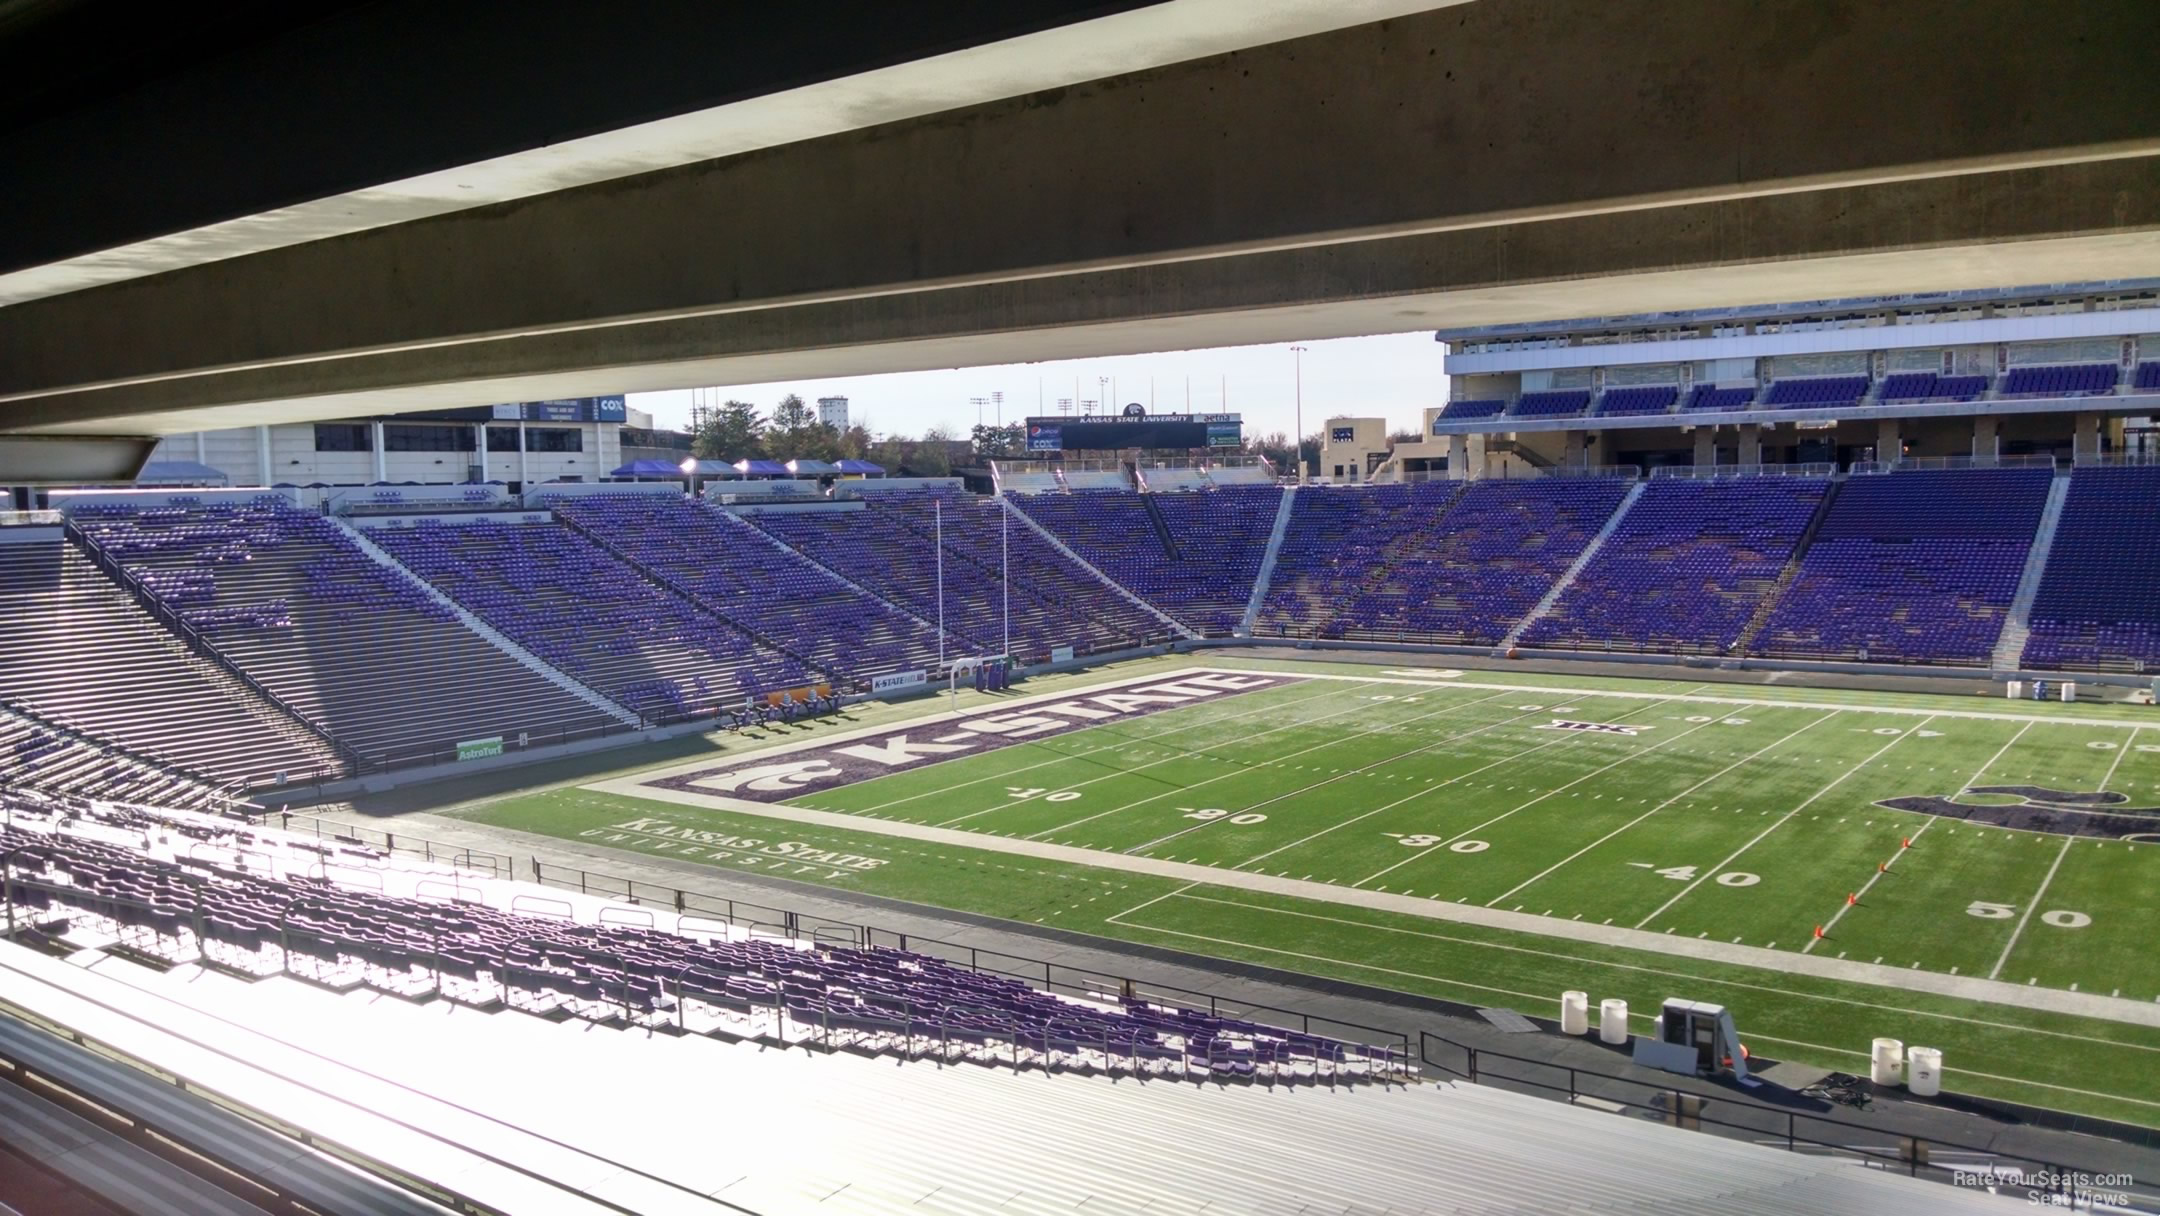 Section 24 at Bill Snyder Family Stadium - RateYourSeats.com